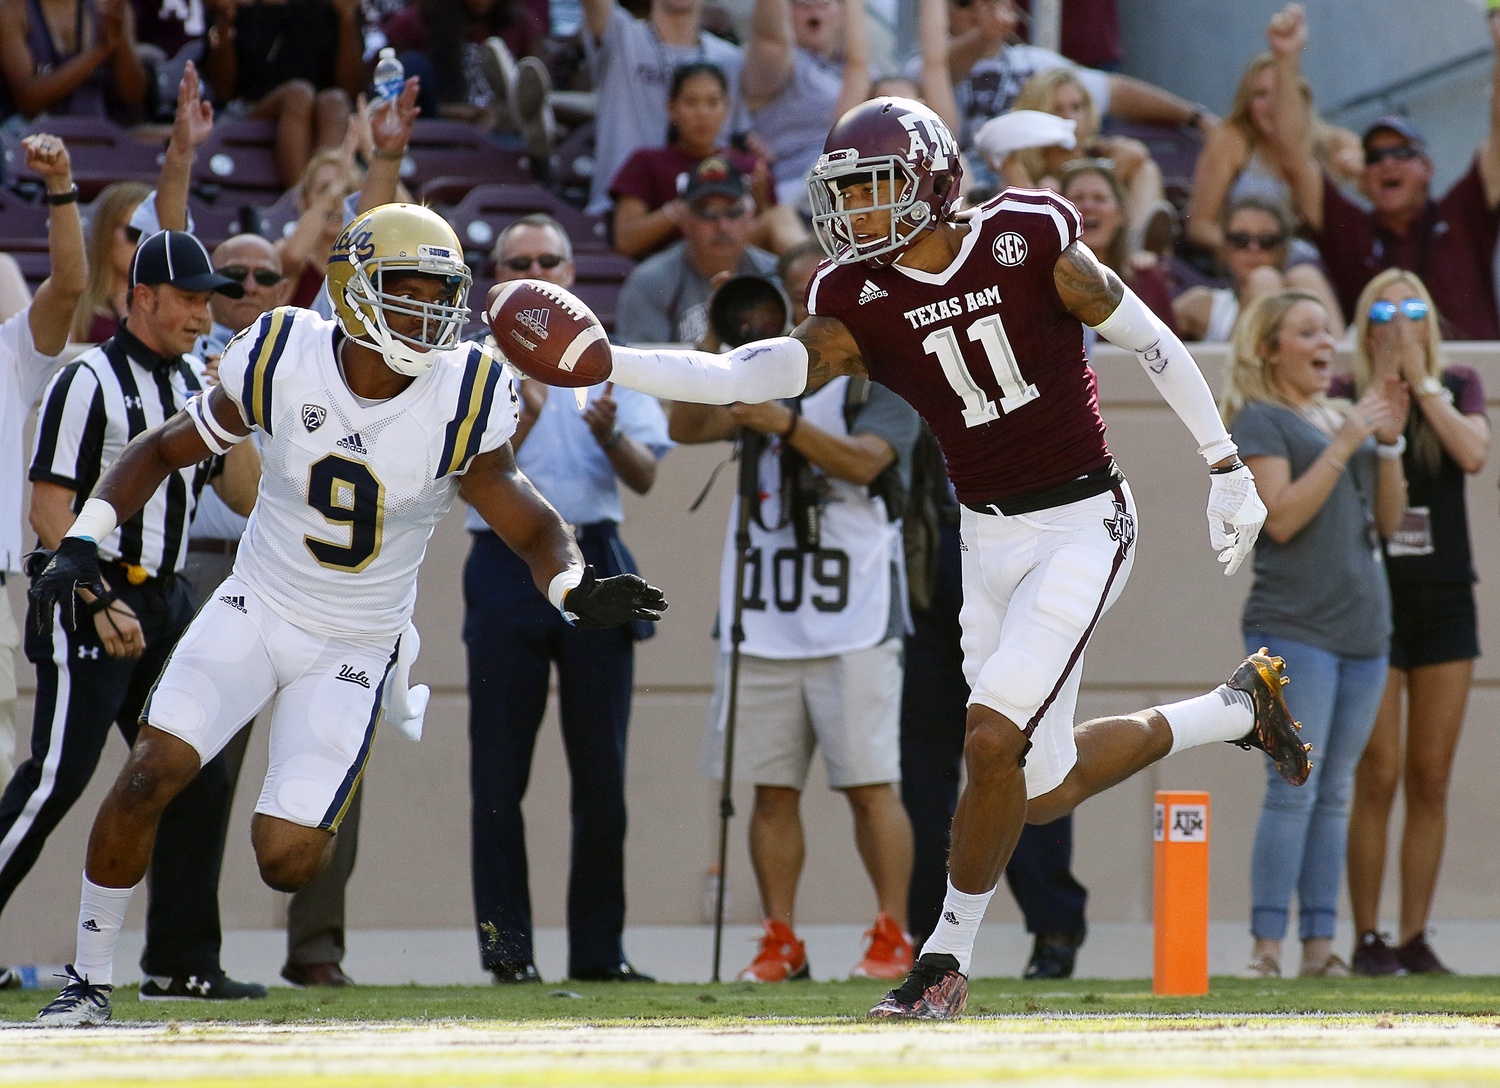 Sep 3, 2016; College Station, TX, USA; Texas A&M Aggies wide receiver Josh Reynolds (11) goes in the for a 40-yard touchdown catch against UCLA Bruins defensive back Marcus Rios (9) during the second half at Kyle Field. Texas A&M won in overtime 31-24. Mandatory Credit: Ray Carlin-USA TODAY Sports